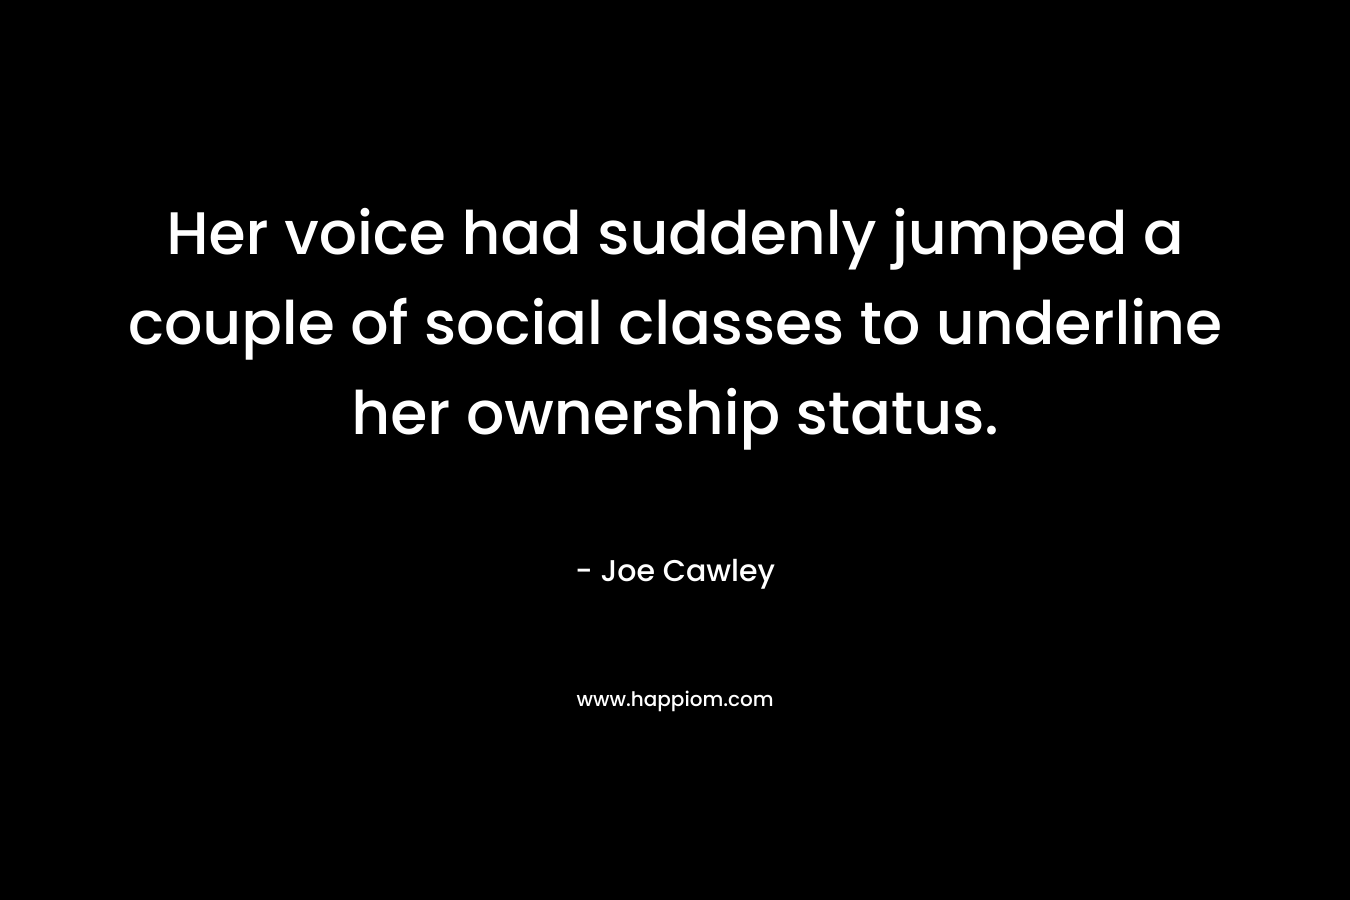 Her voice had suddenly jumped a couple of social classes to underline her ownership status. – Joe Cawley